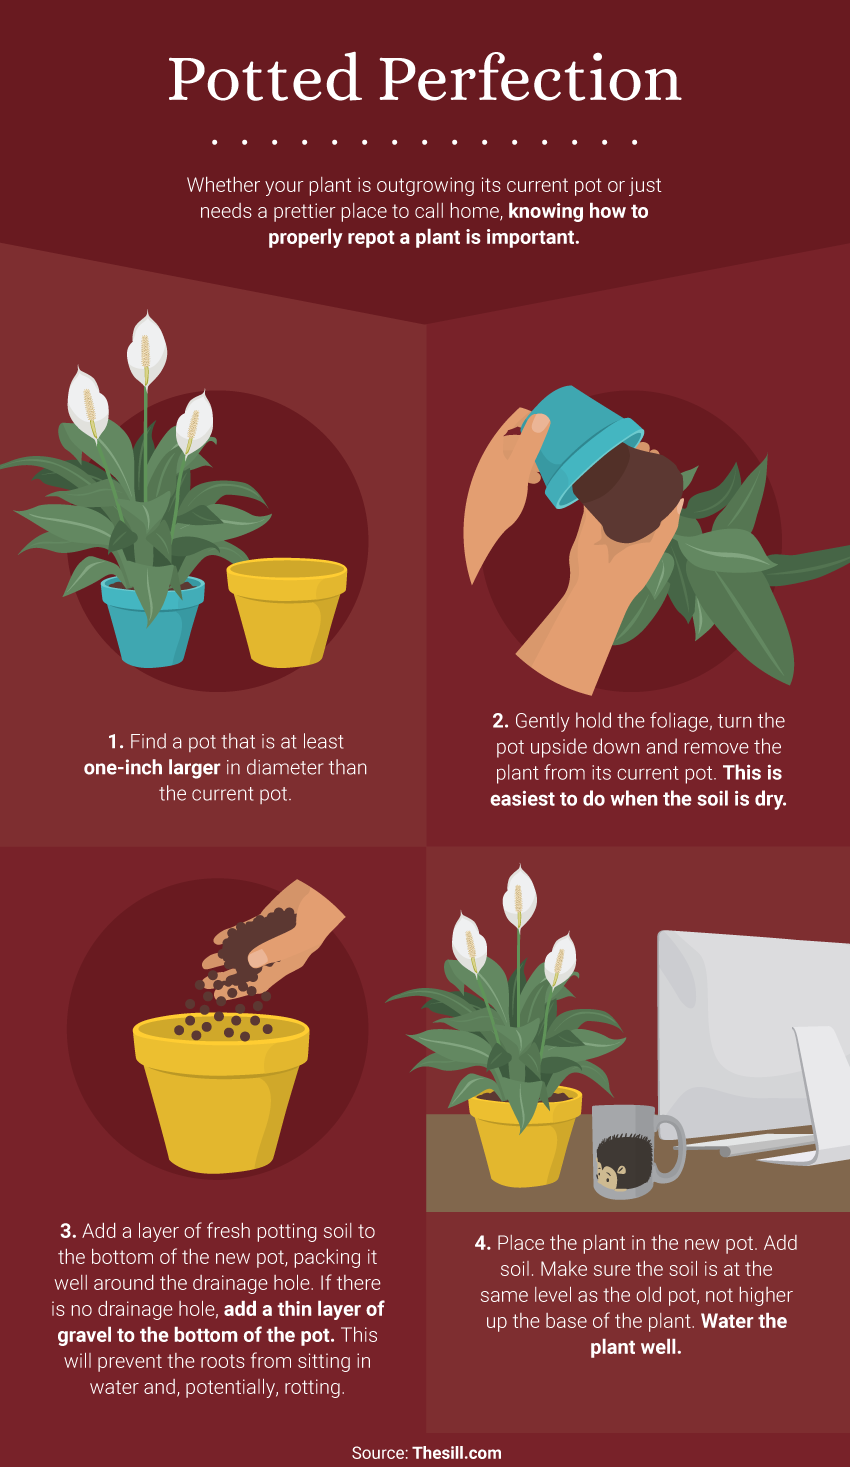 Potted Perfection - The Benefits of Office Plants